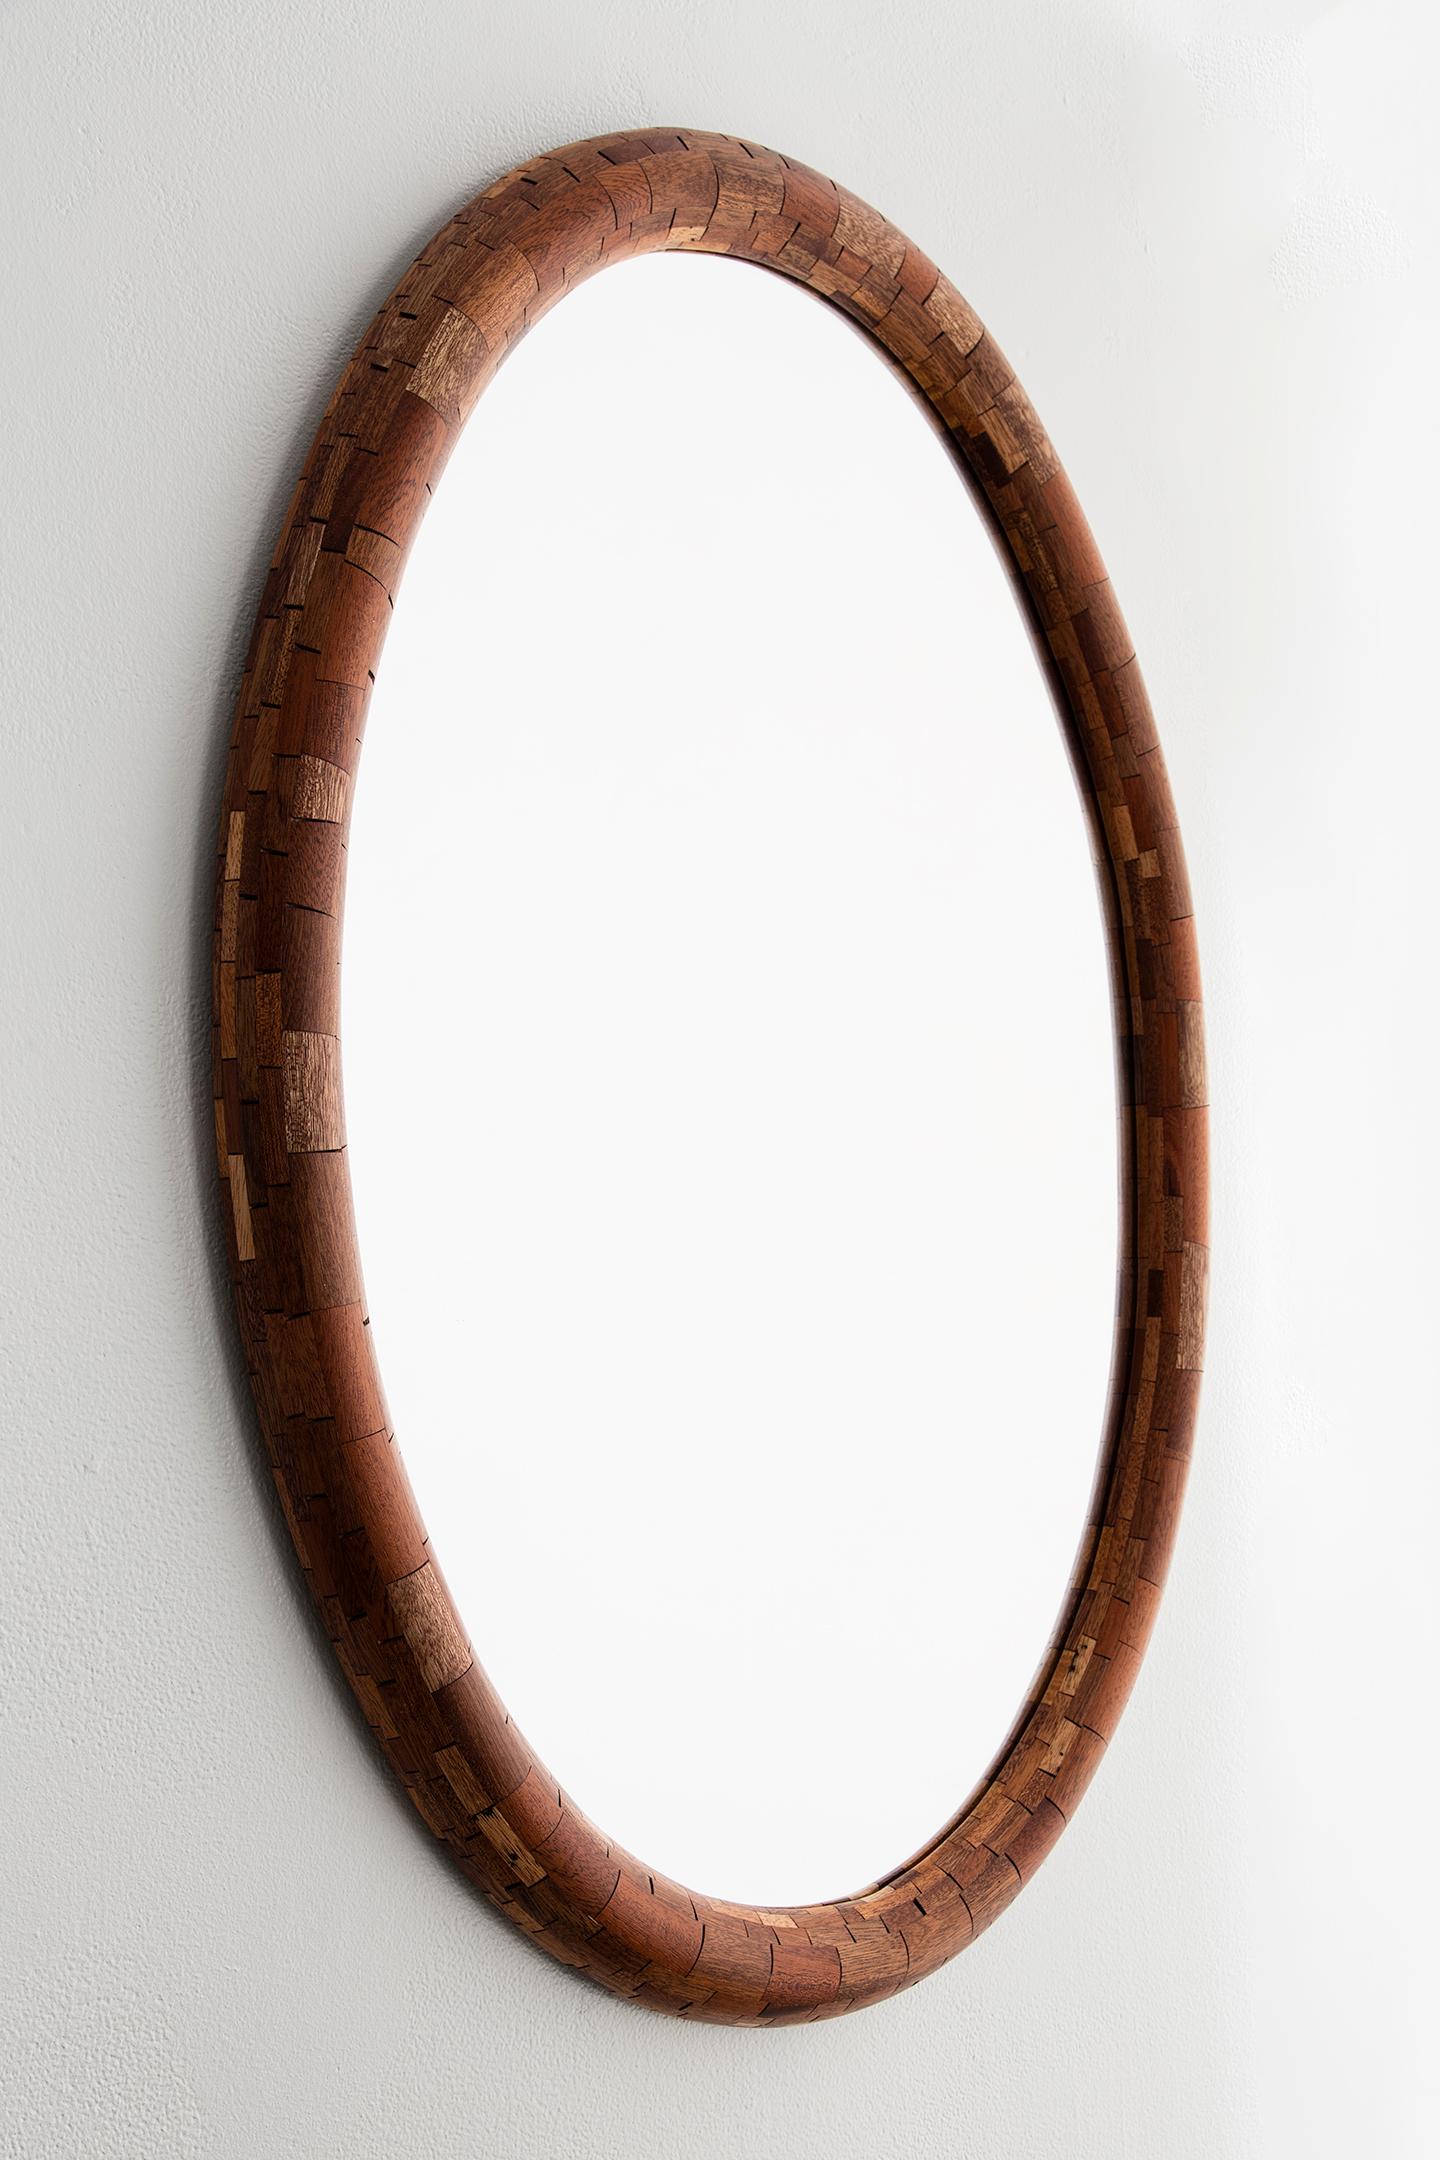 Modern STACKED Walnut Oval Wall Mirror by Richard Haining, Available Now